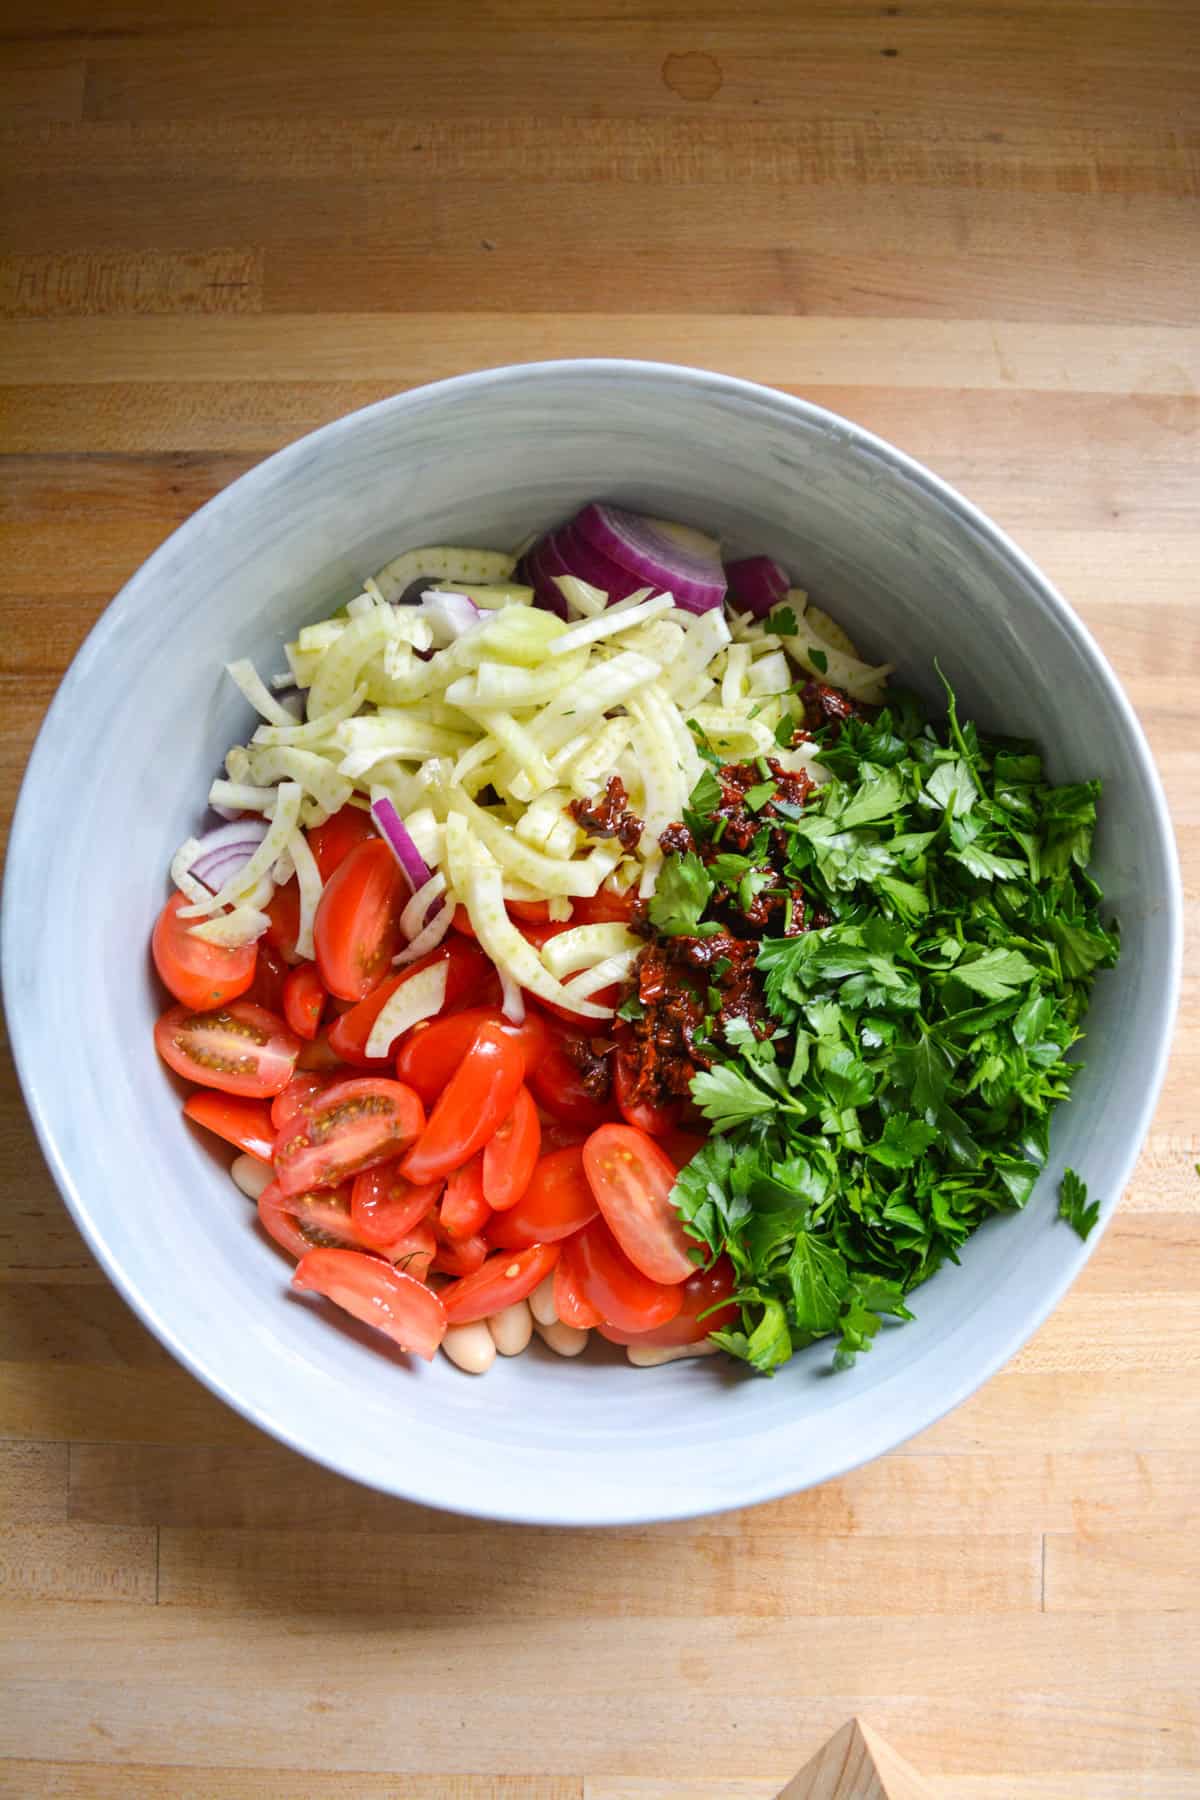 Ingredients for bean salad in a large mixing bowl.